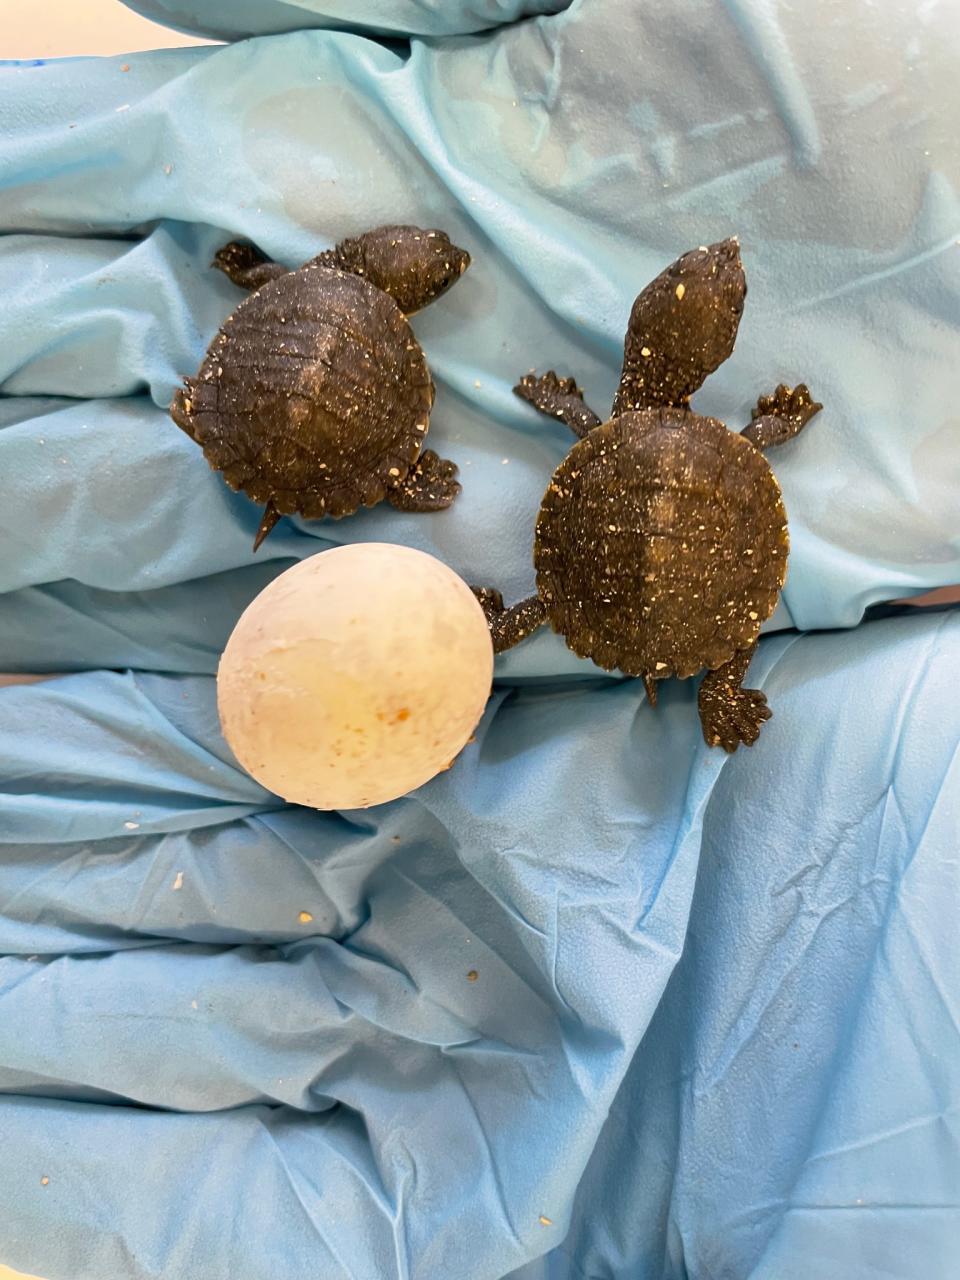 The twin turtles being held in gloved hands, along with their egg.